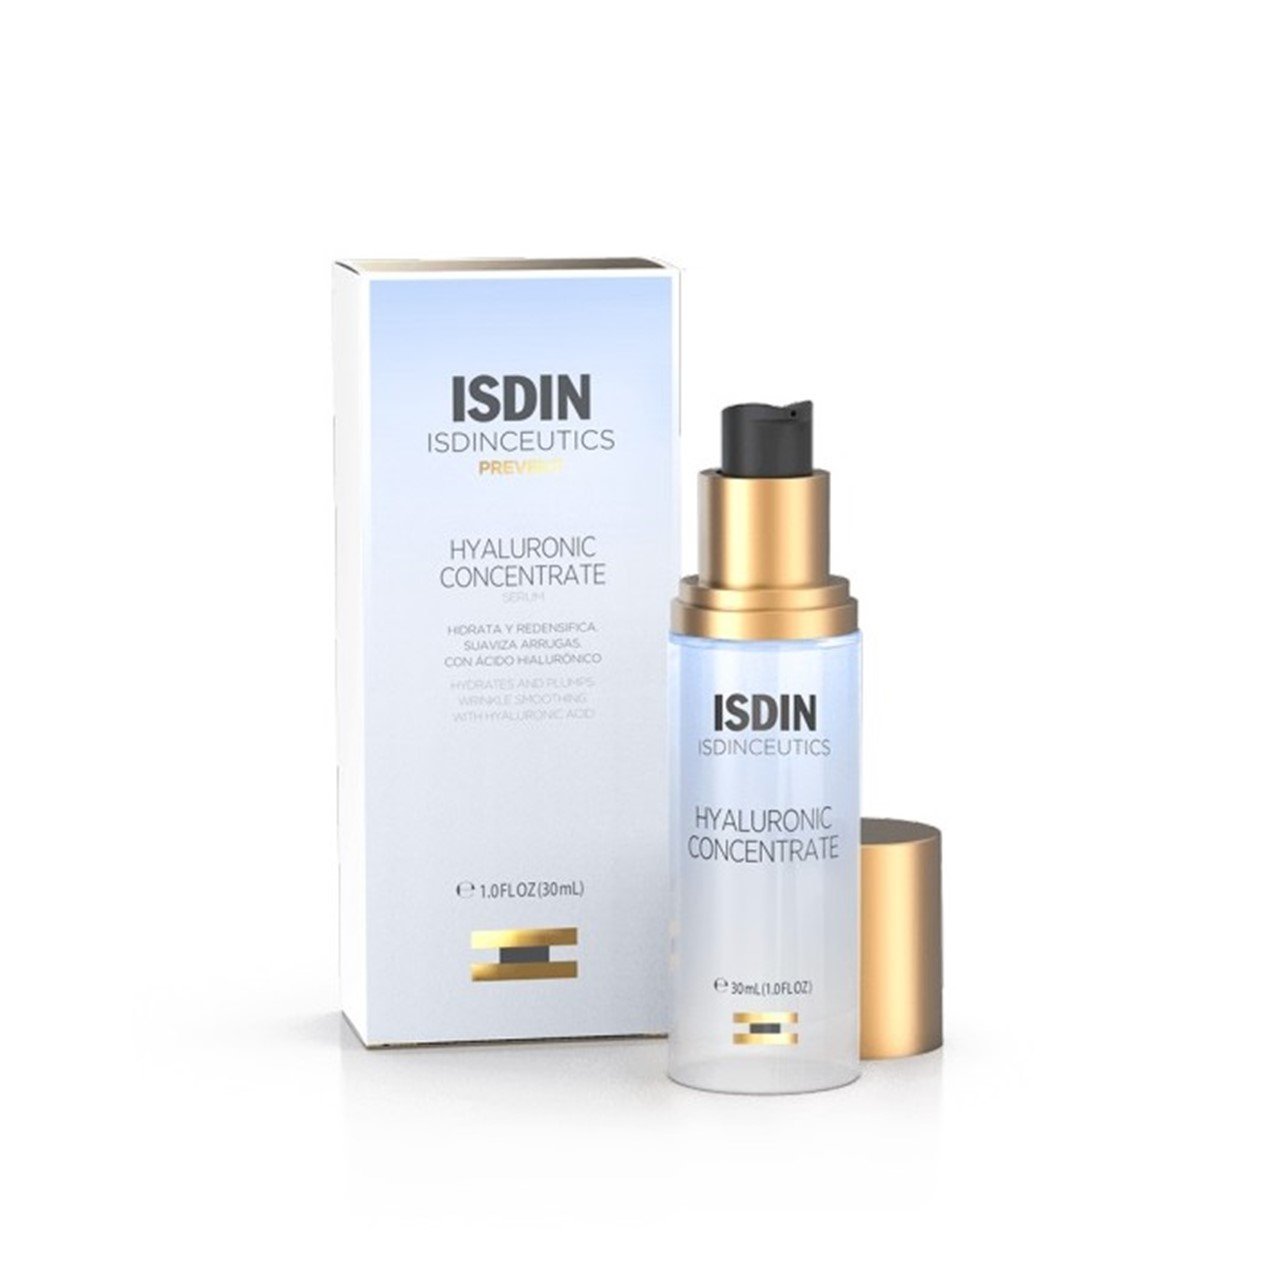 ISDINCEUTICS Hyaluronic Concentrate 30ml